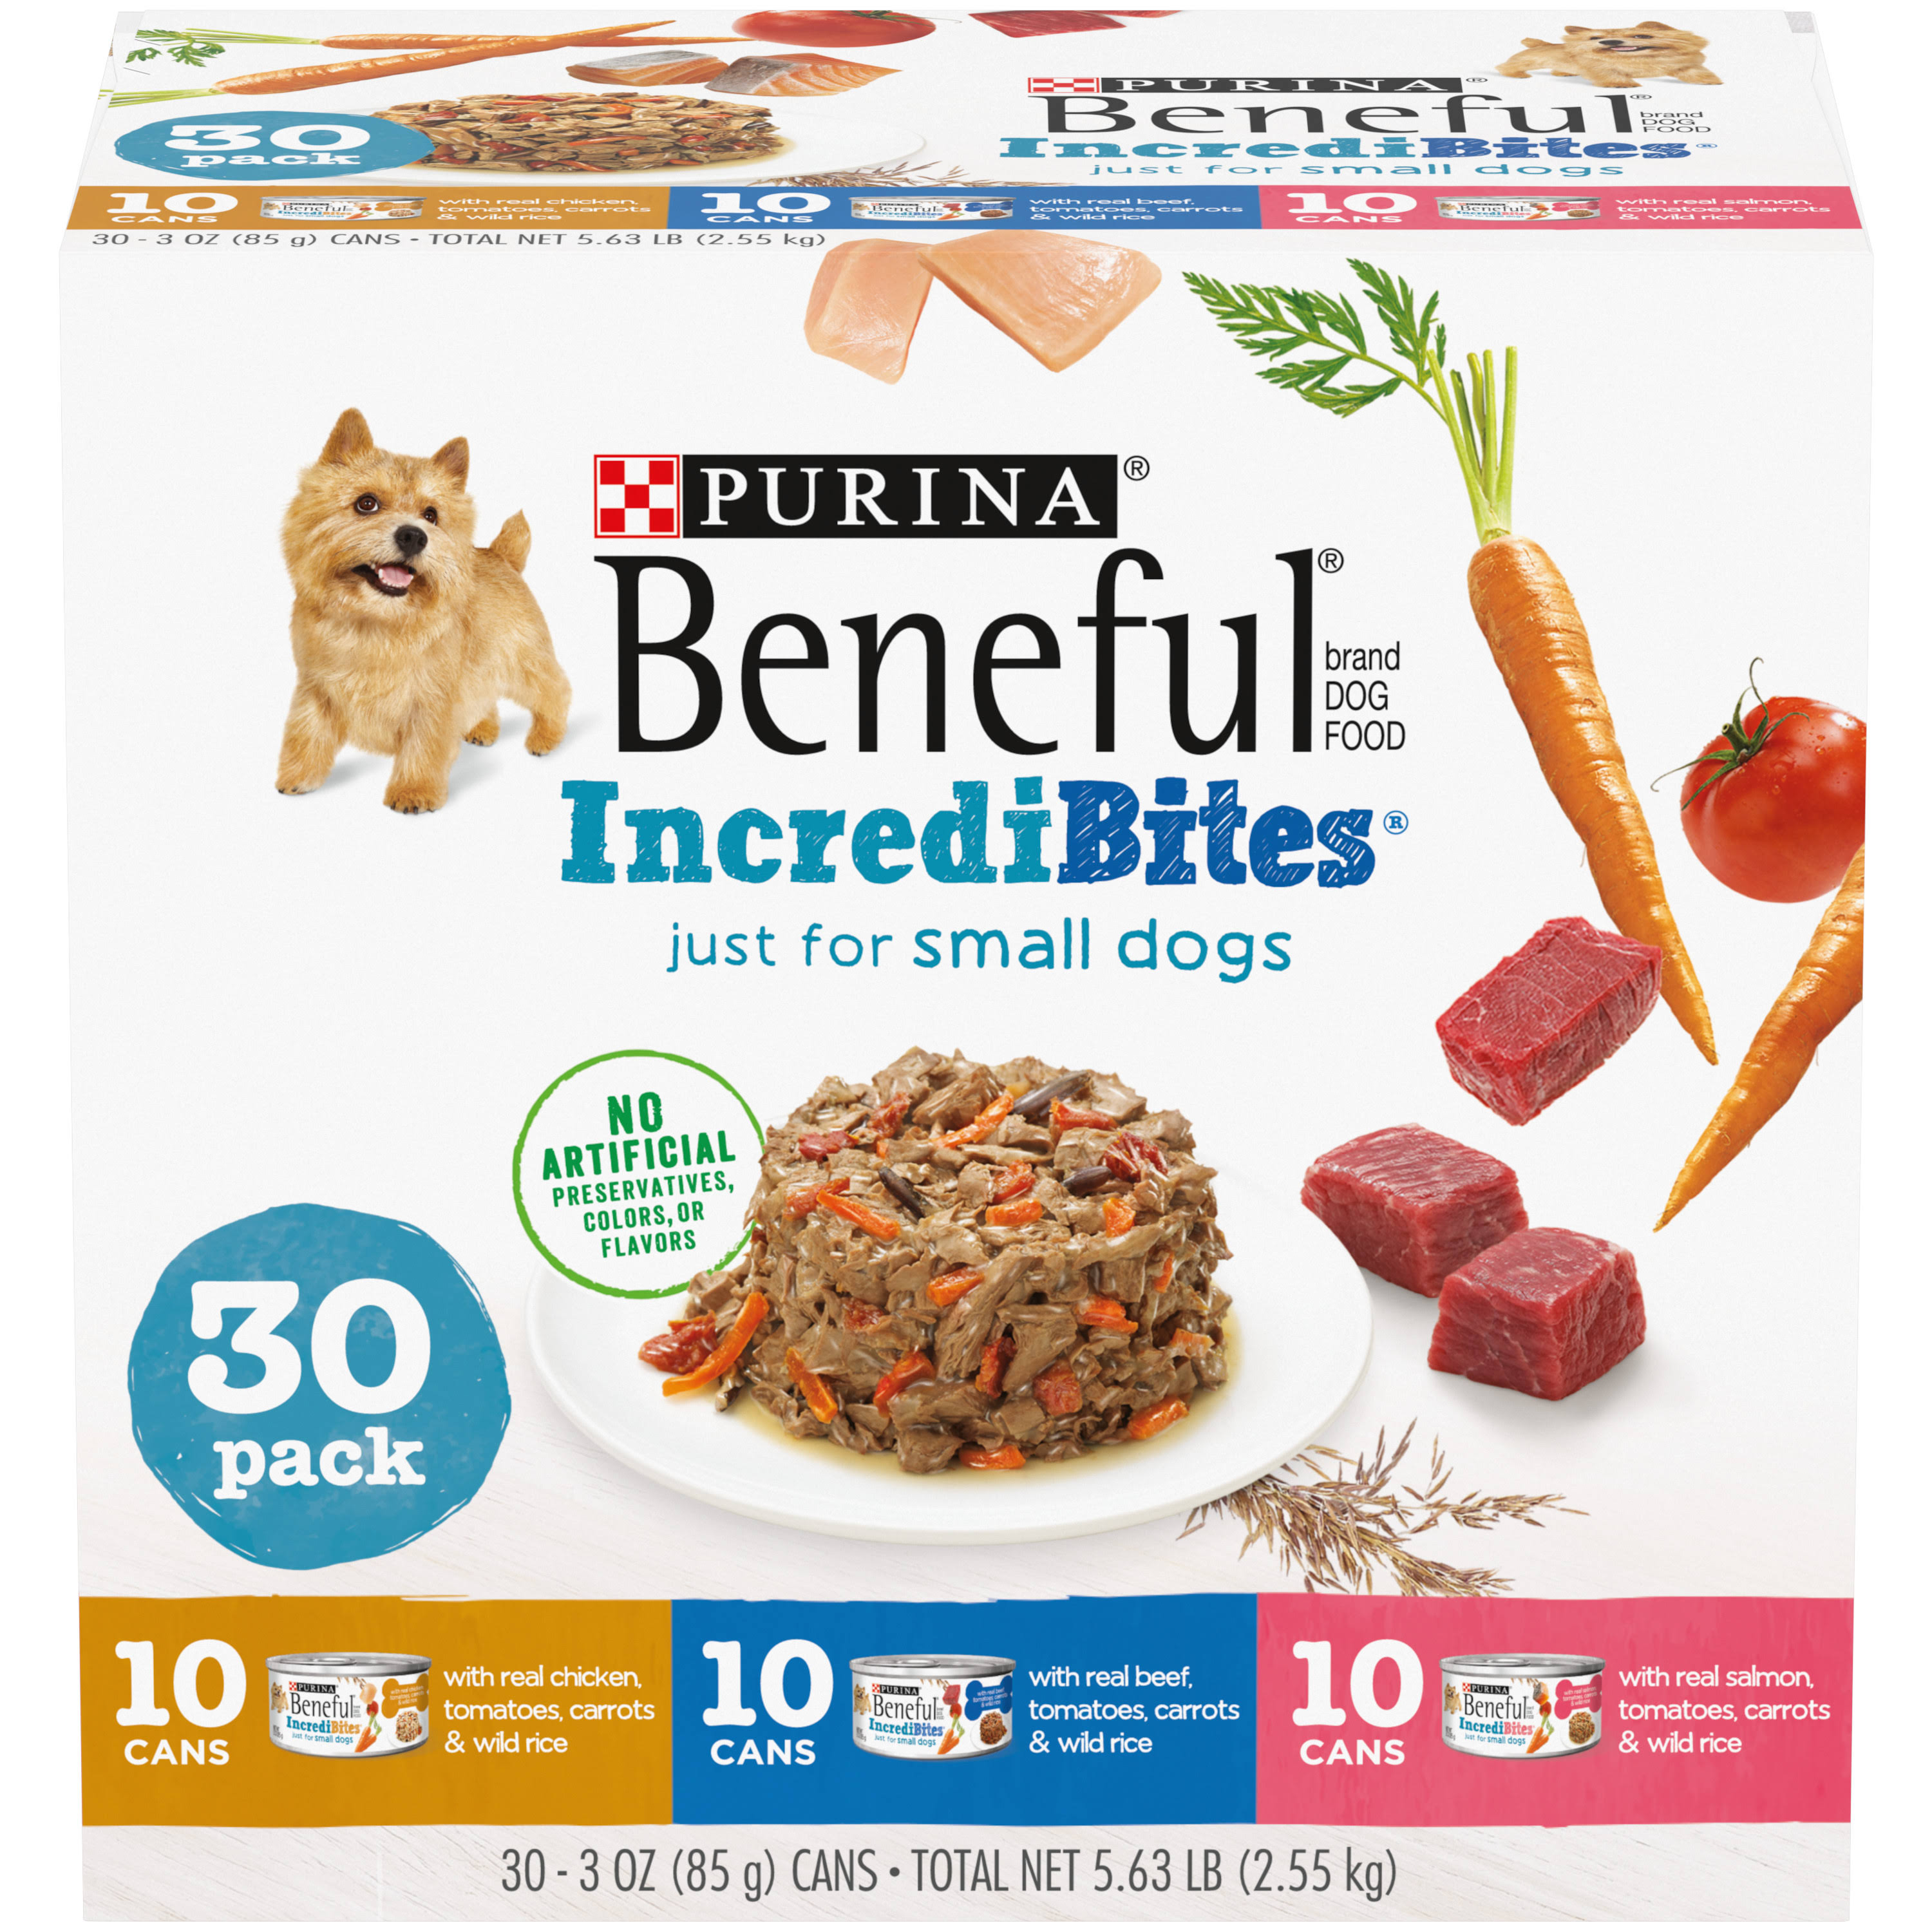 Beneful IncrediBites Dog Food, Small Dogs, 30 Pack - 30 pack, 3 oz cans